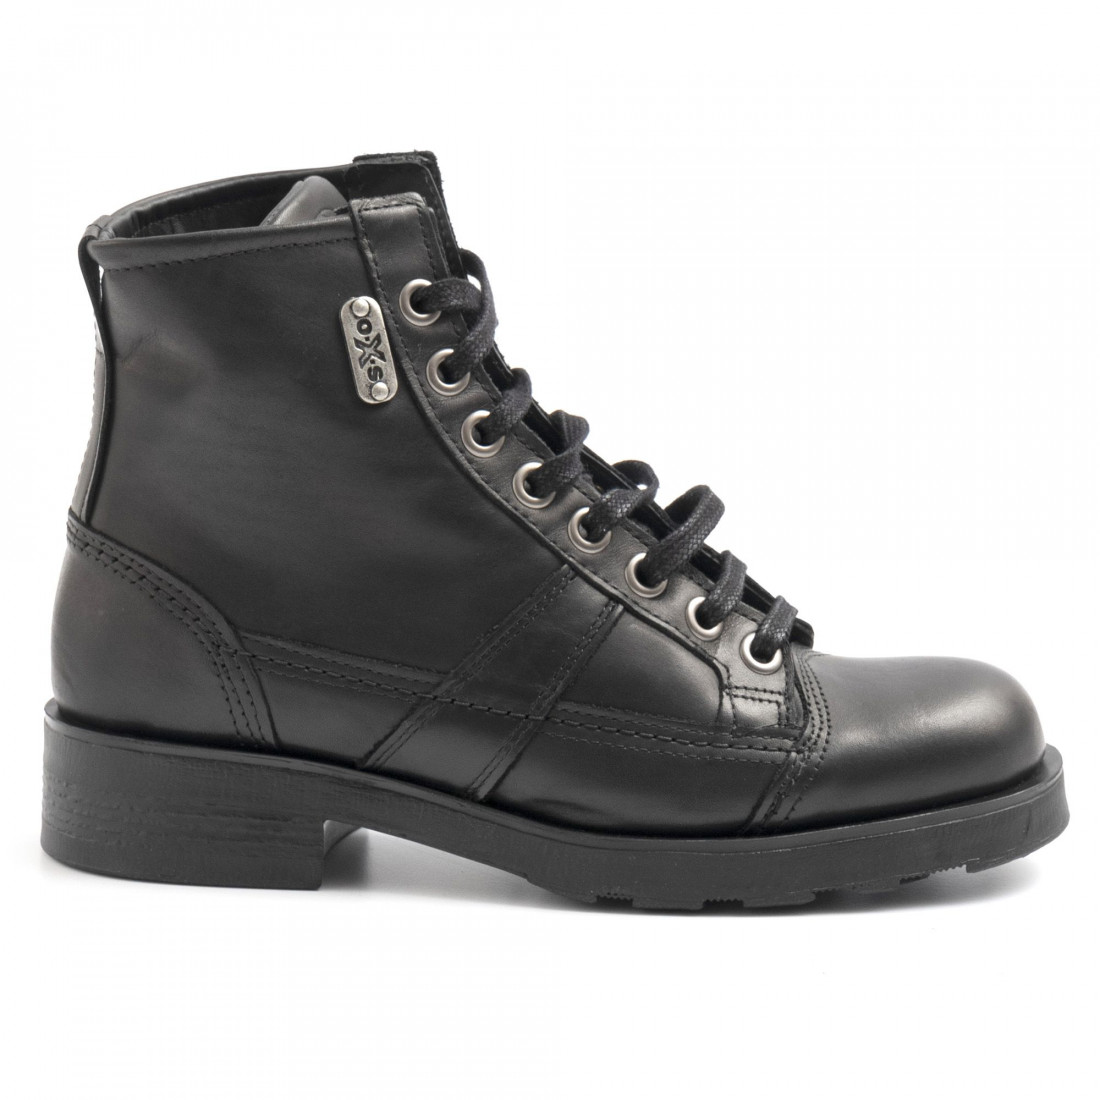 Black women's Lace-up booties with military sole